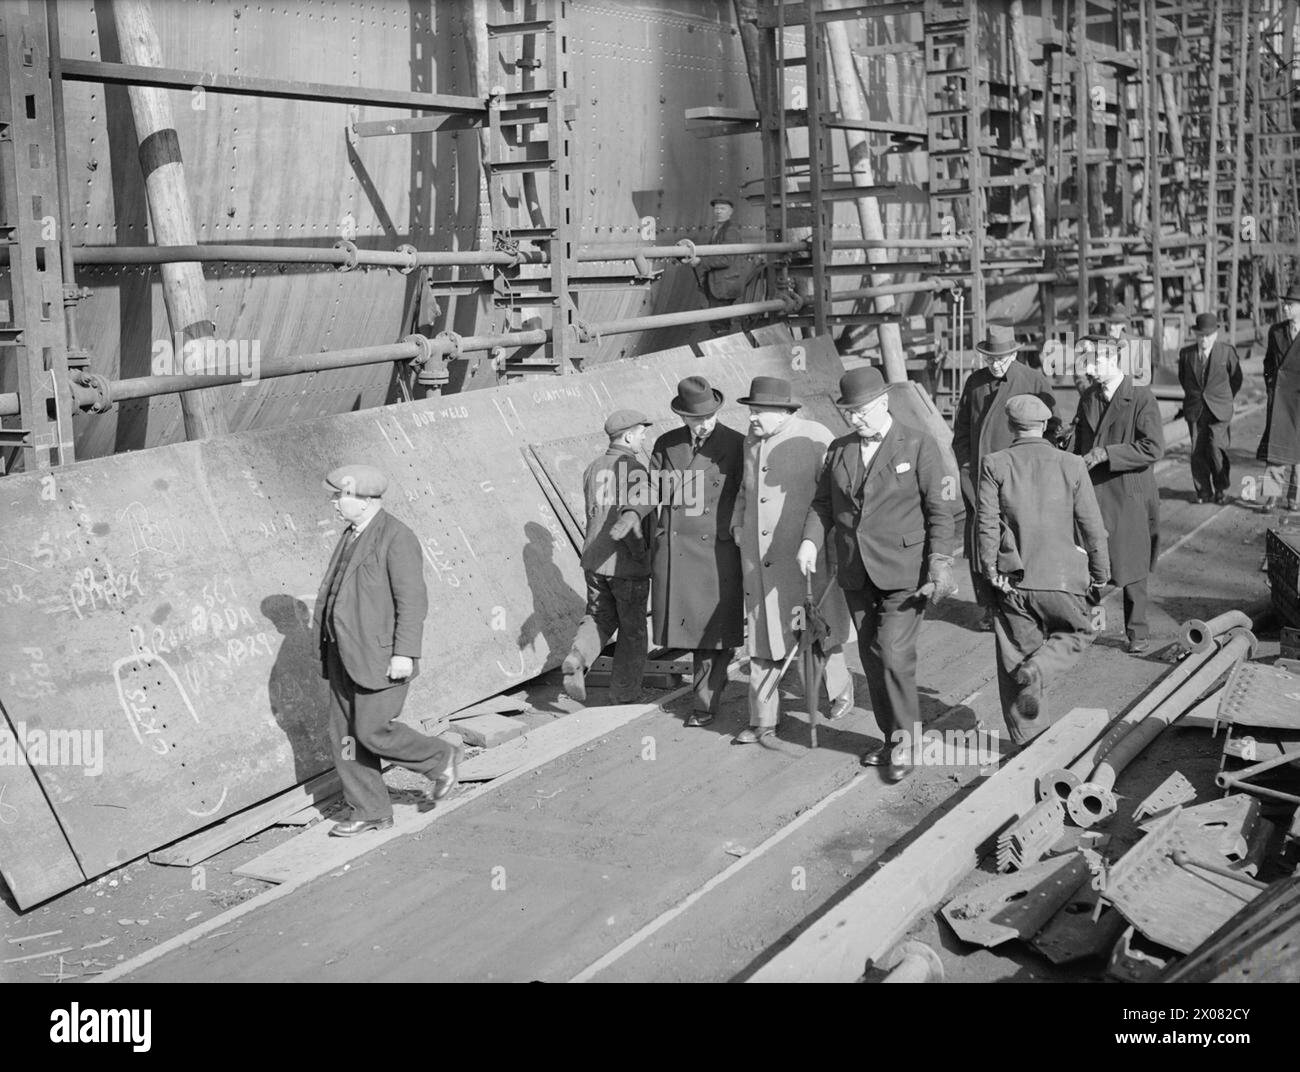 HIGH COMMISSIONER FOR SOUTH AFRICA VISITS SCOTTISH SHIPYARDS. 7 APRIL 1943, GLASGOW, COLONEL DENEYS REITZ, HIGH COMMISSIONER FOR SOUTH AFRICA IN BRITAIN, HAS COMPLETED A TWO-DAYS' TOUR OF SHIPBUILDING AND NAVAL REPAIR YARDS IN SCOTLAND. - Colonel Reitz talks to Glasgow dockyard men Stock Photo